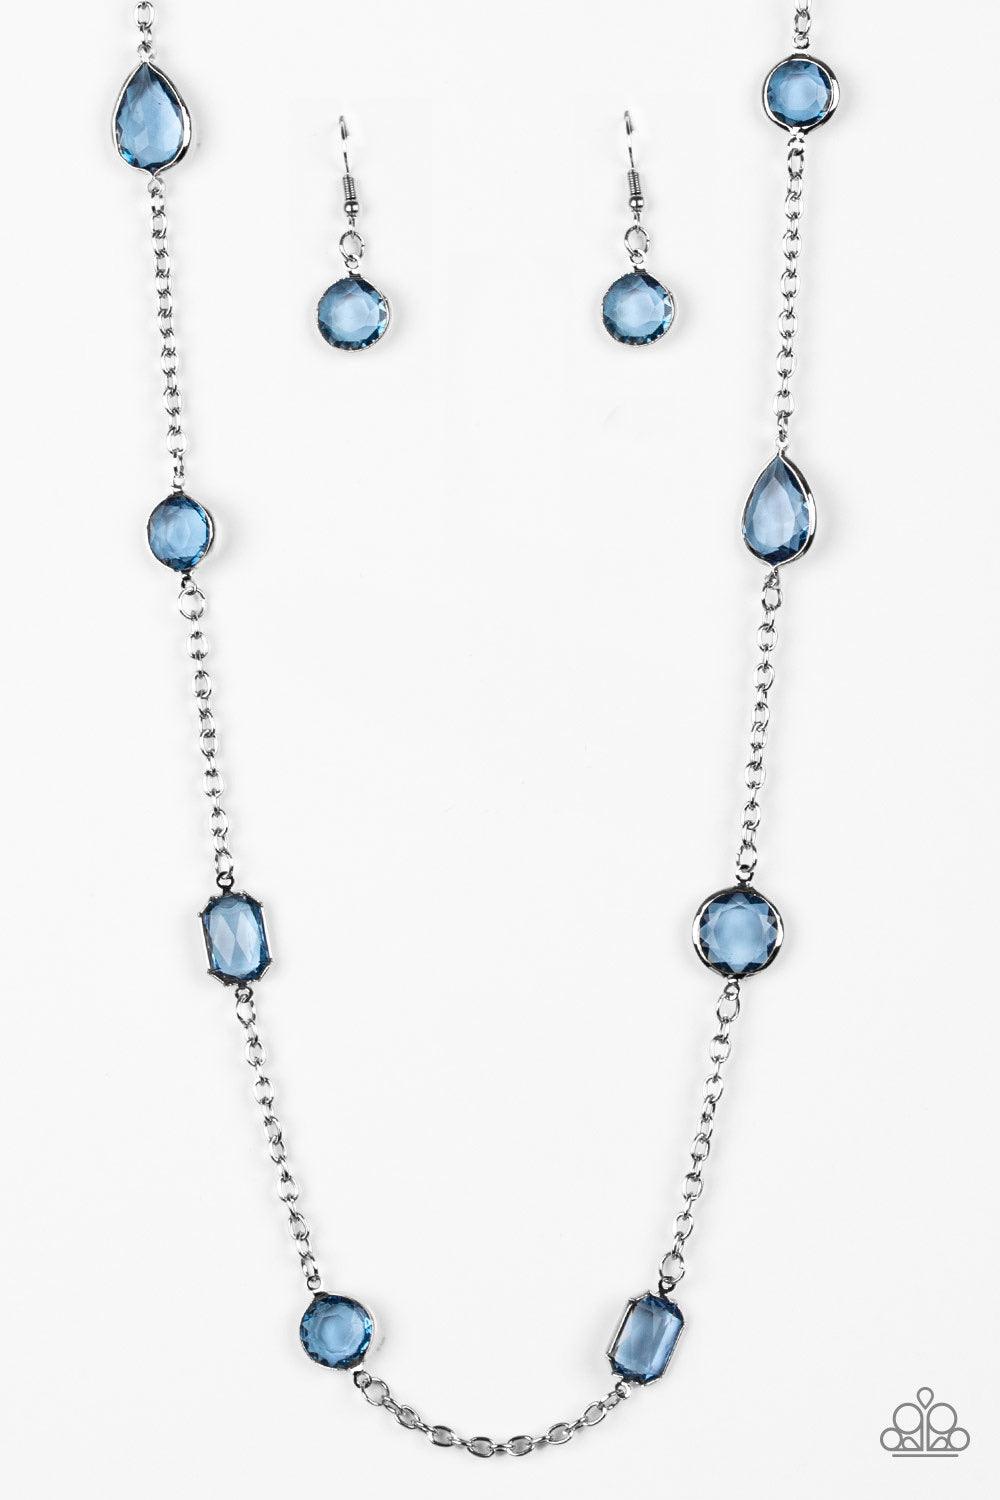 Paparazzi Accessories Glassy Glamorous - Blue Featuring sleek silver fittings, an array of glassy Blue Depths gemstones trickle along a shimmery silver chain for a glamorous look. Features an adjustable clasp closure. Sold as one individual necklace. Incl